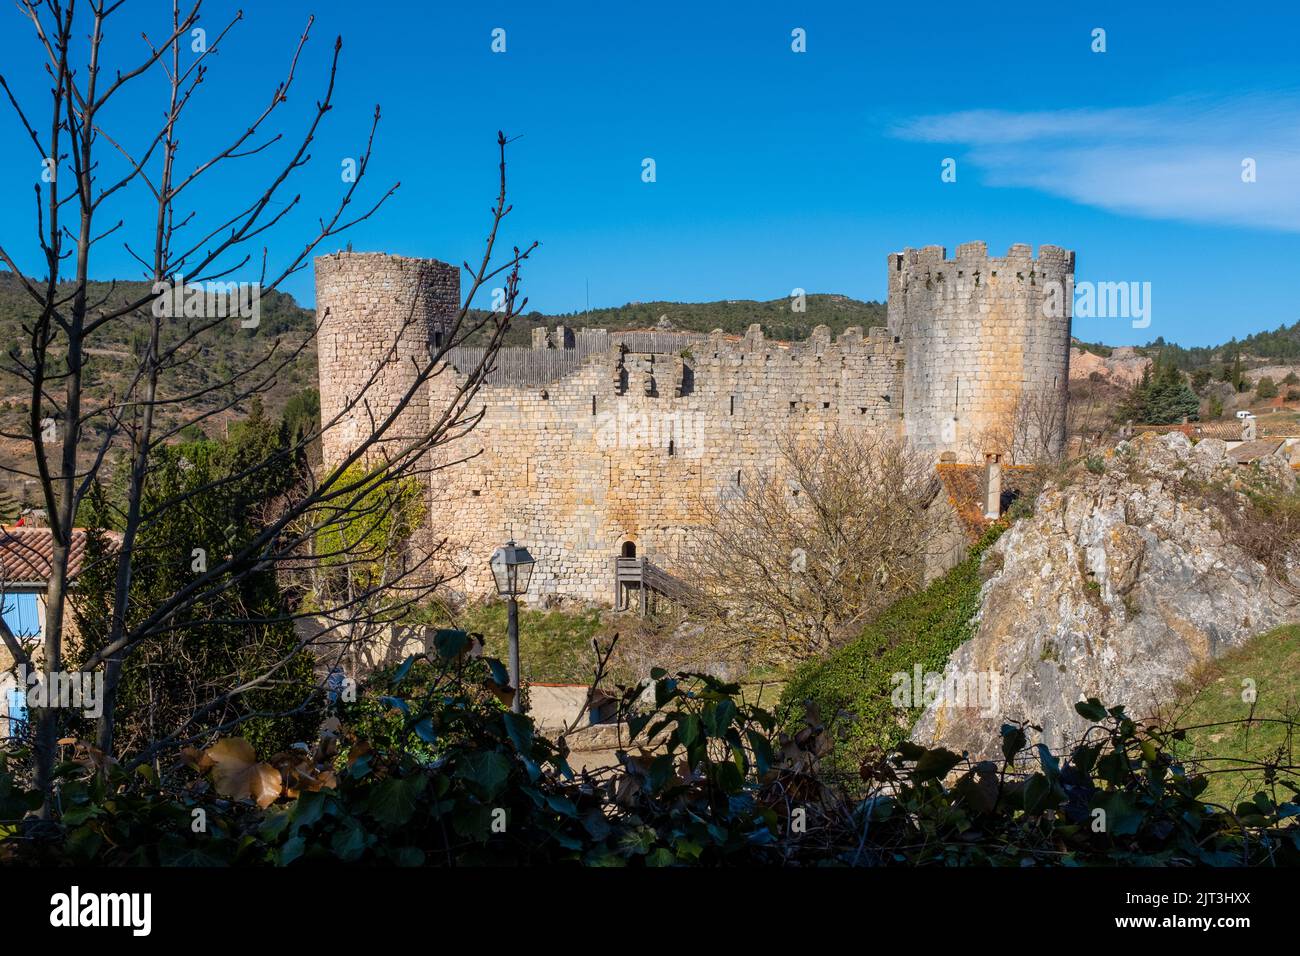 The medieval fortress of Villerouge-Termenes in Southern France, with no people, taken on a sunny end of winter day Stock Photo